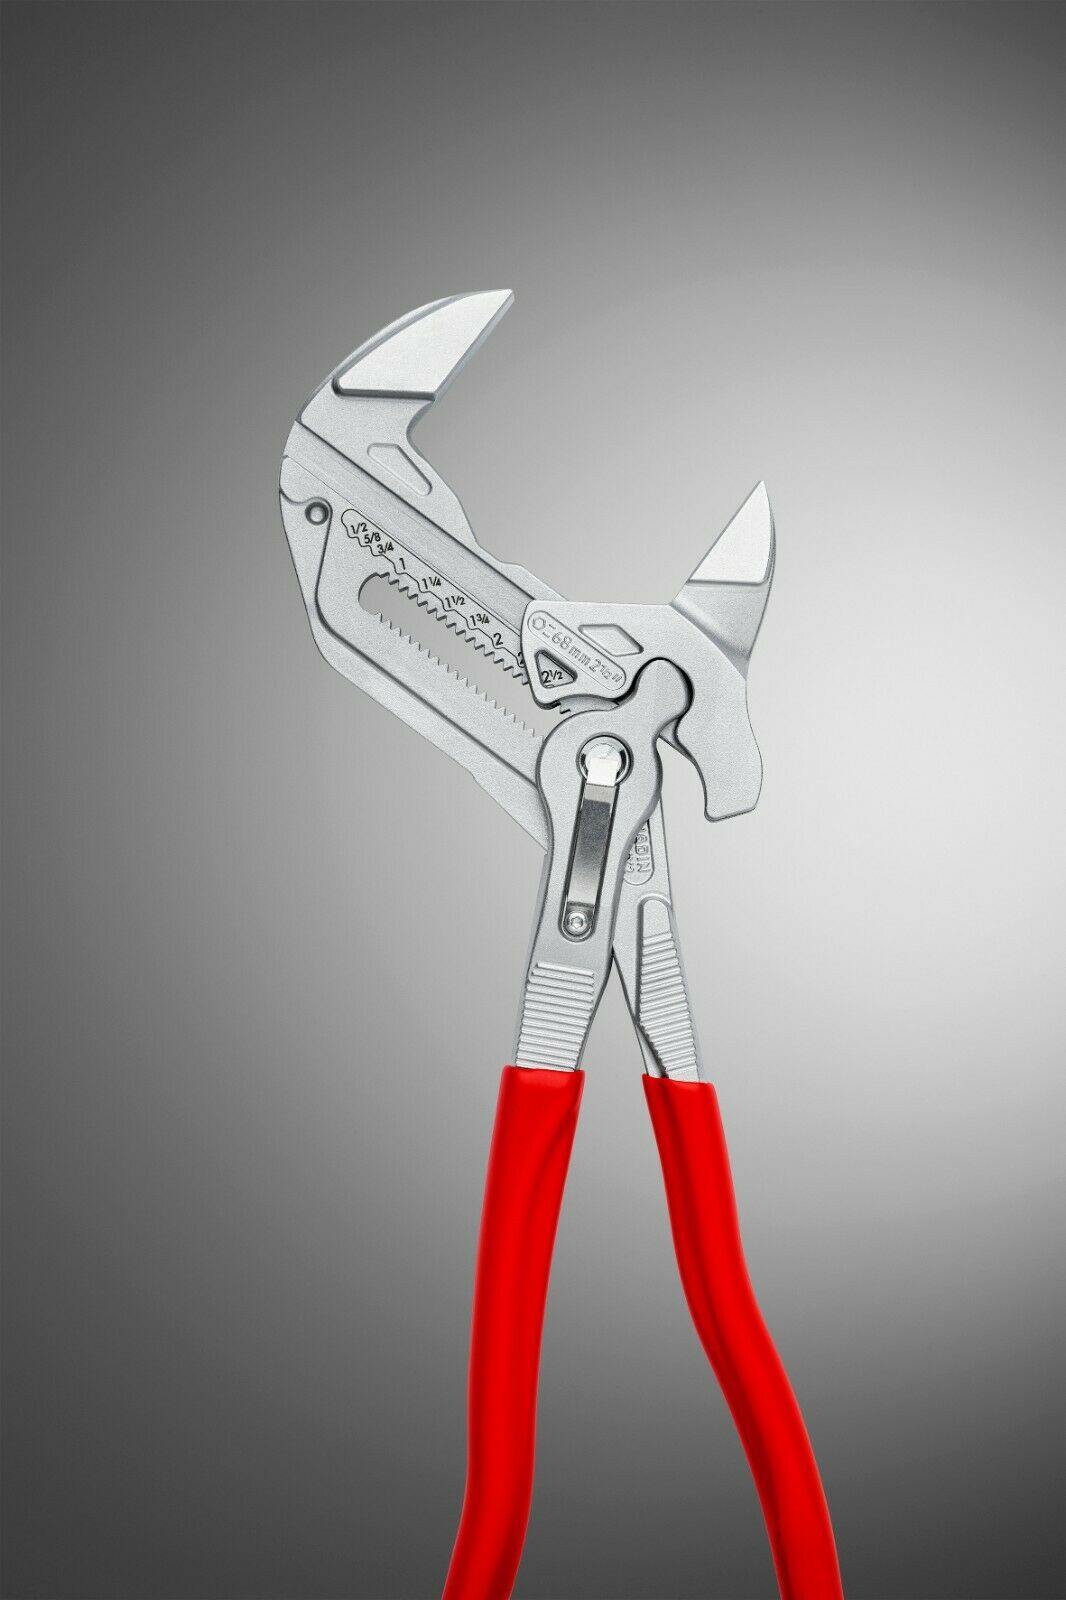 knipex pliers wrench 12" 86 03 300